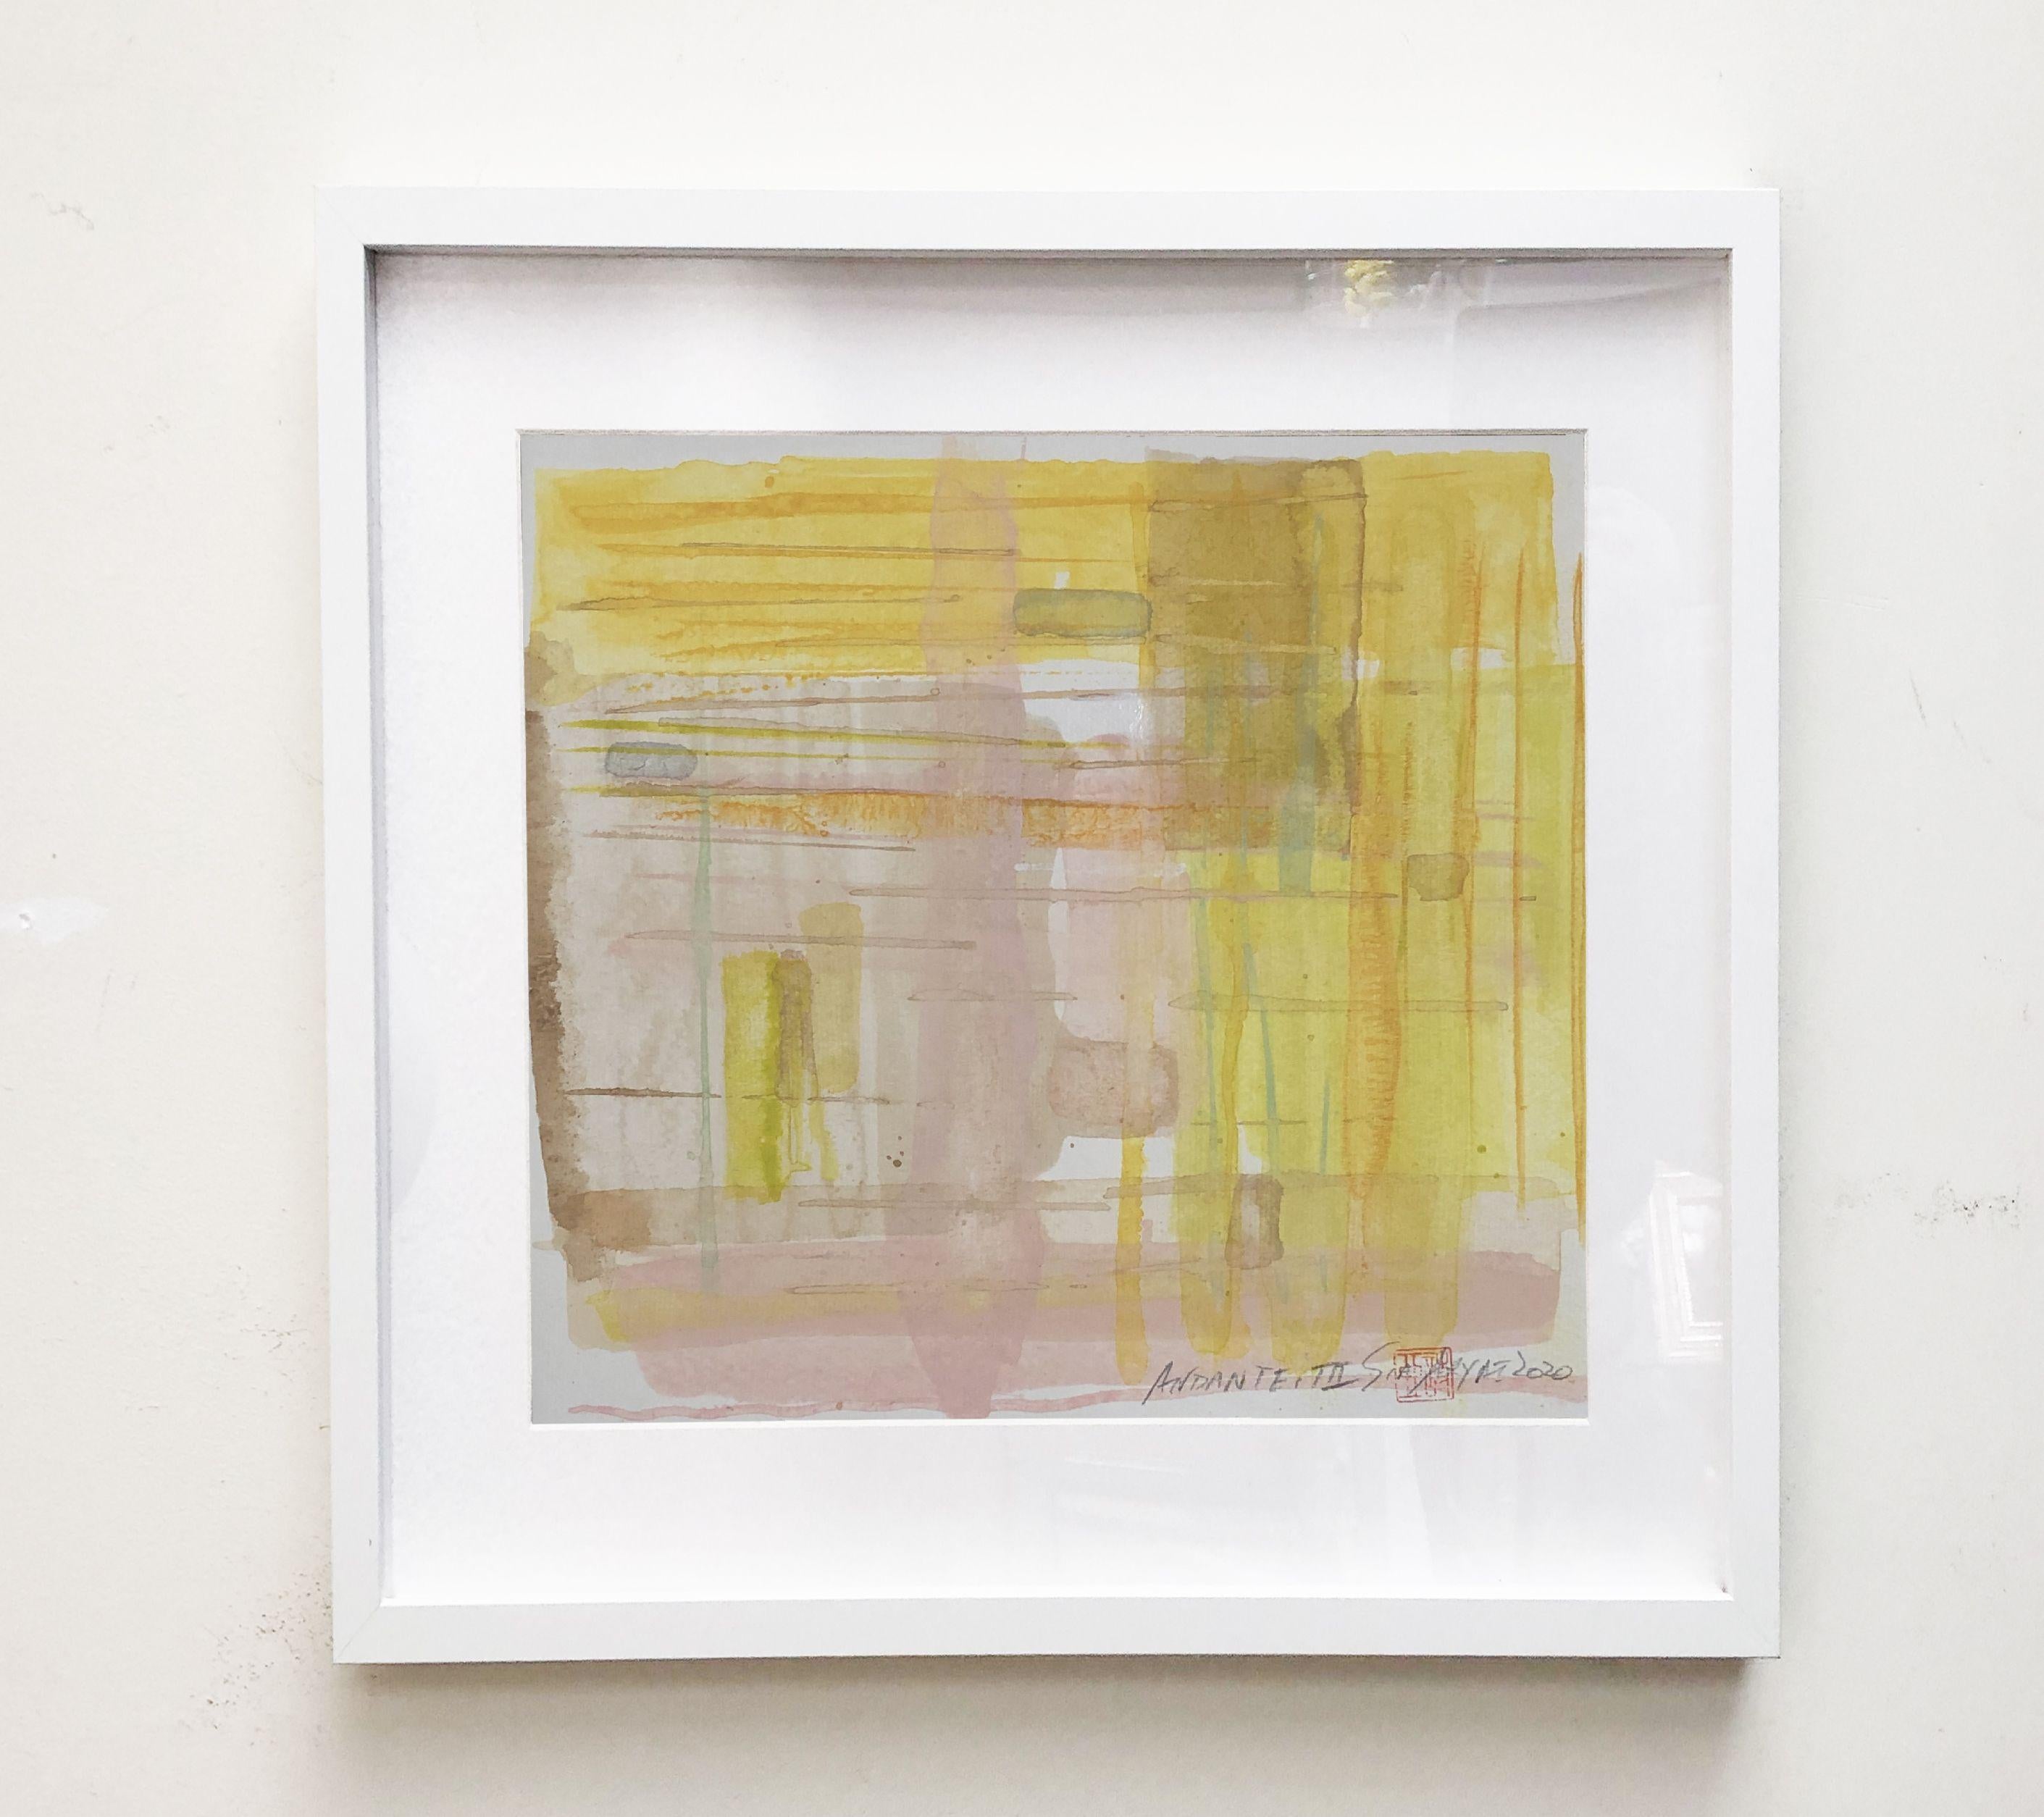 Andante. III Ready to Hang framed Original Abstract Painting  Yellow stands for playful and optimistic.   Shades of bold energetic yellow race across the palest white and beige background.   This lively original painting on heavy stock brings a pop